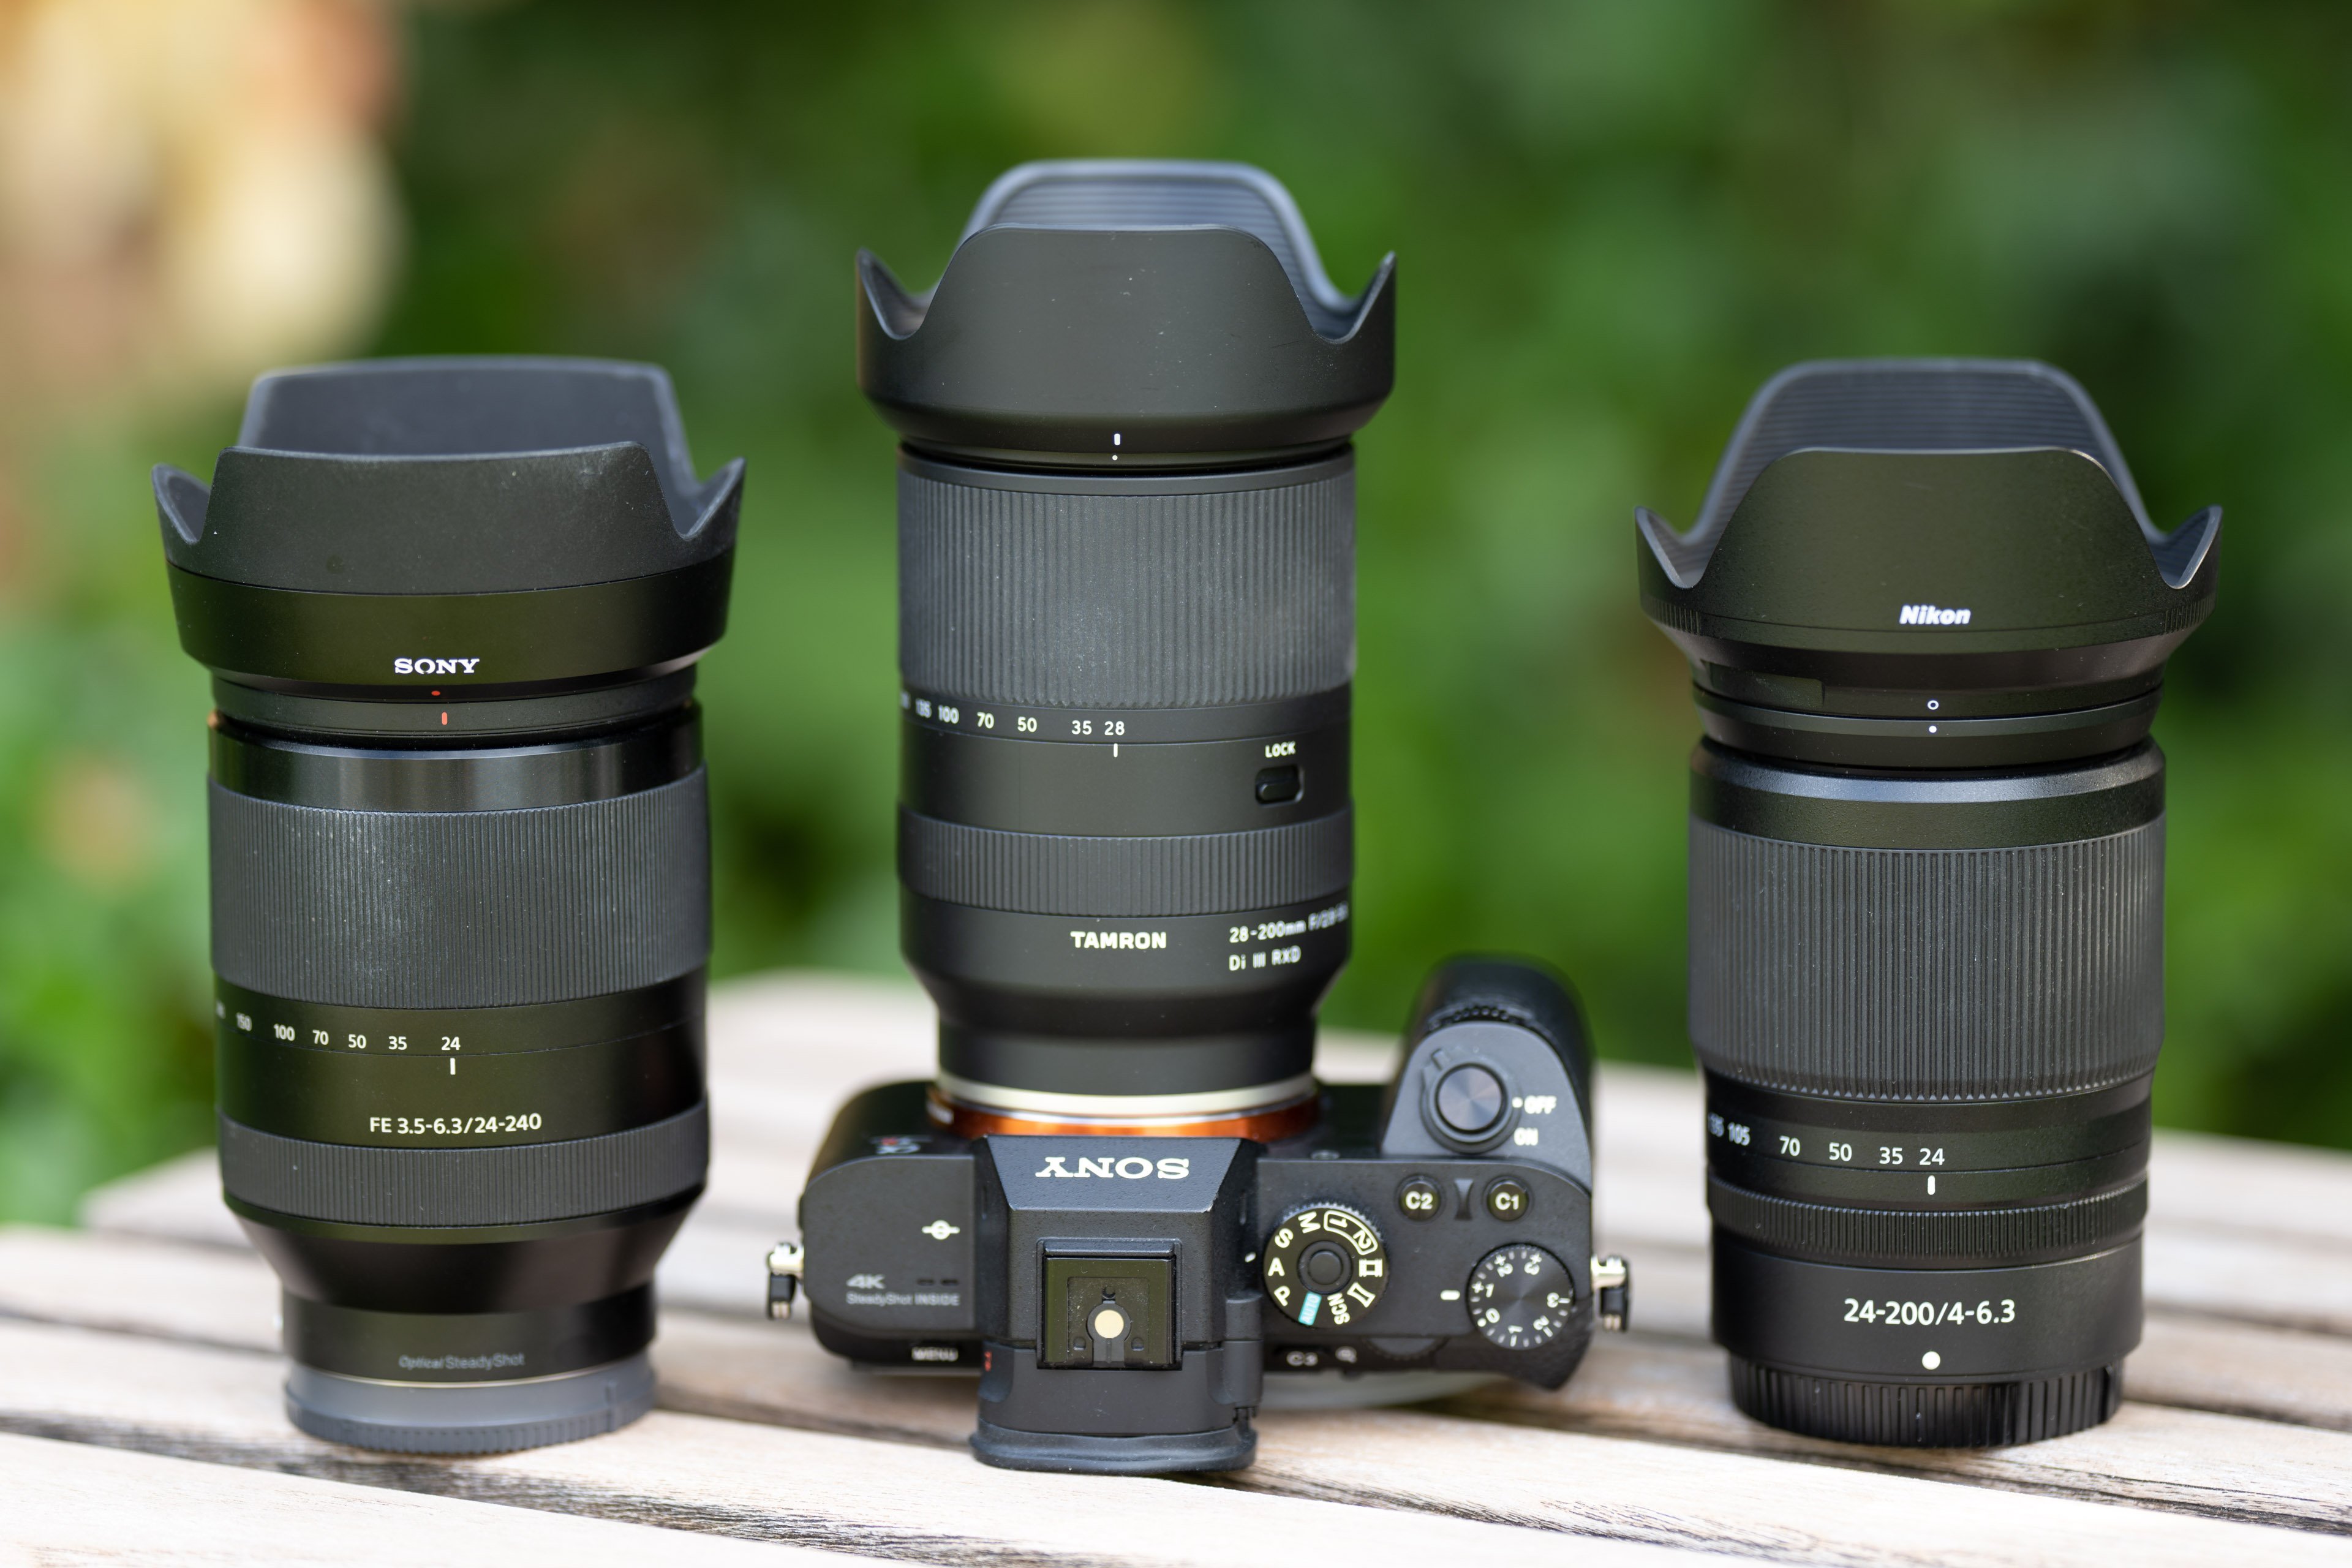 Tamron 28-200mm f2.8-5.6 Di III RXD review | Cameralabs